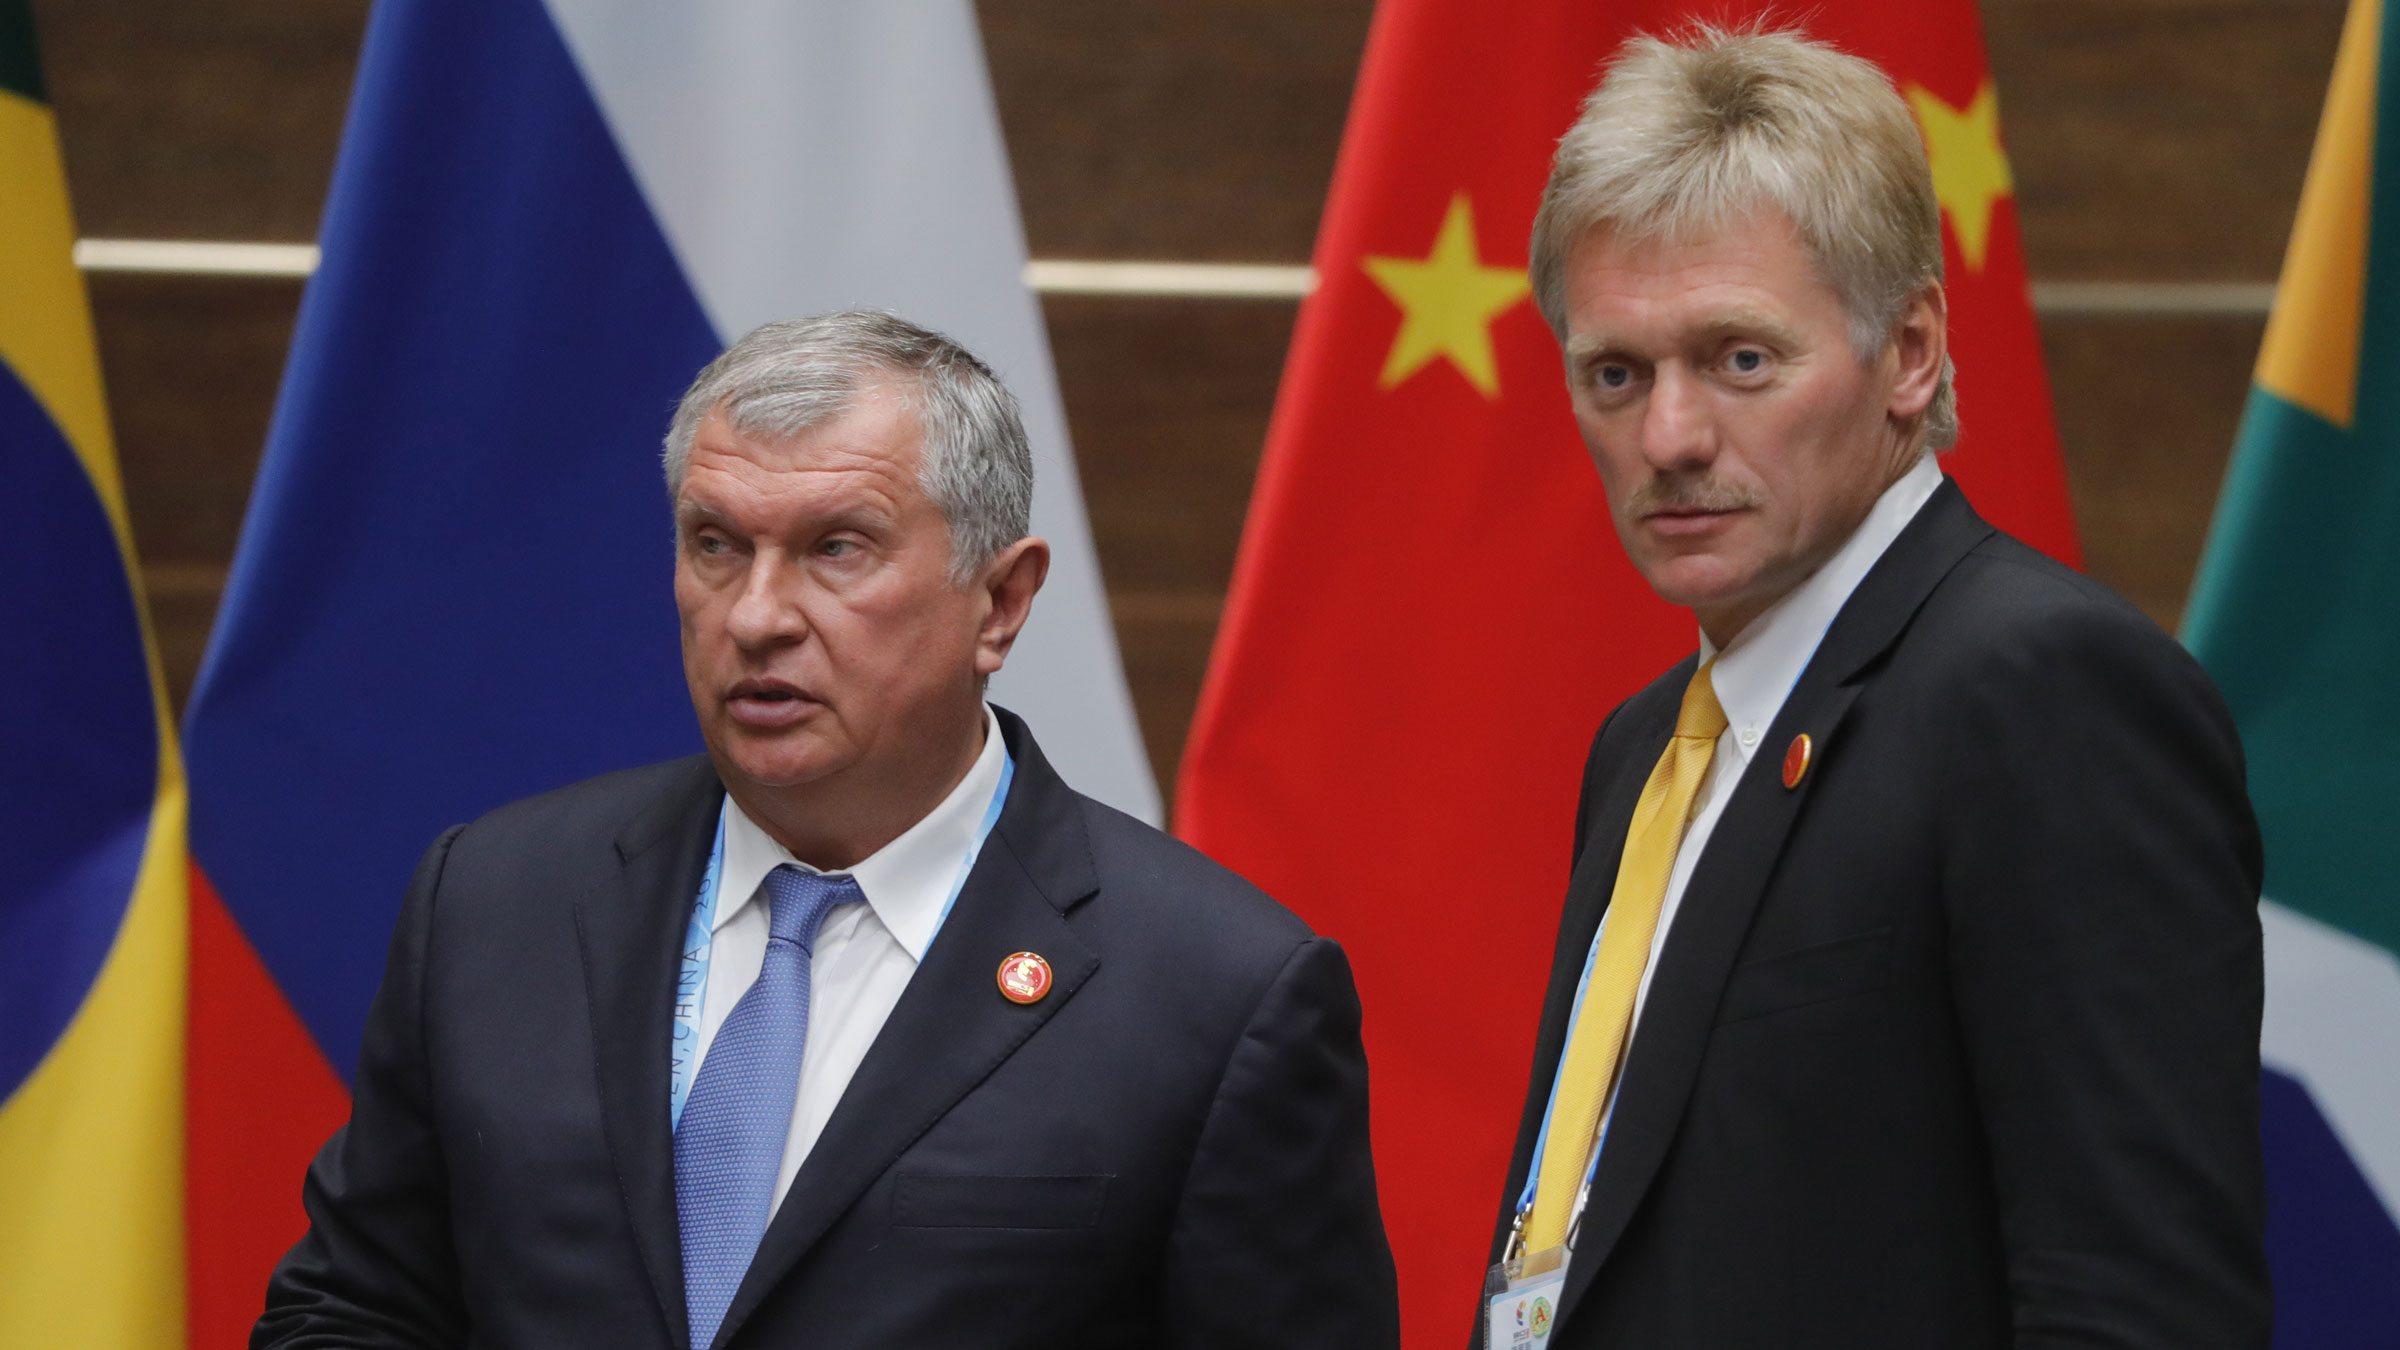 Rosneft CEO Igor Sechin, left, and Russian presidential spokesman Dmitry Peskov attend a summit in China in 2017.